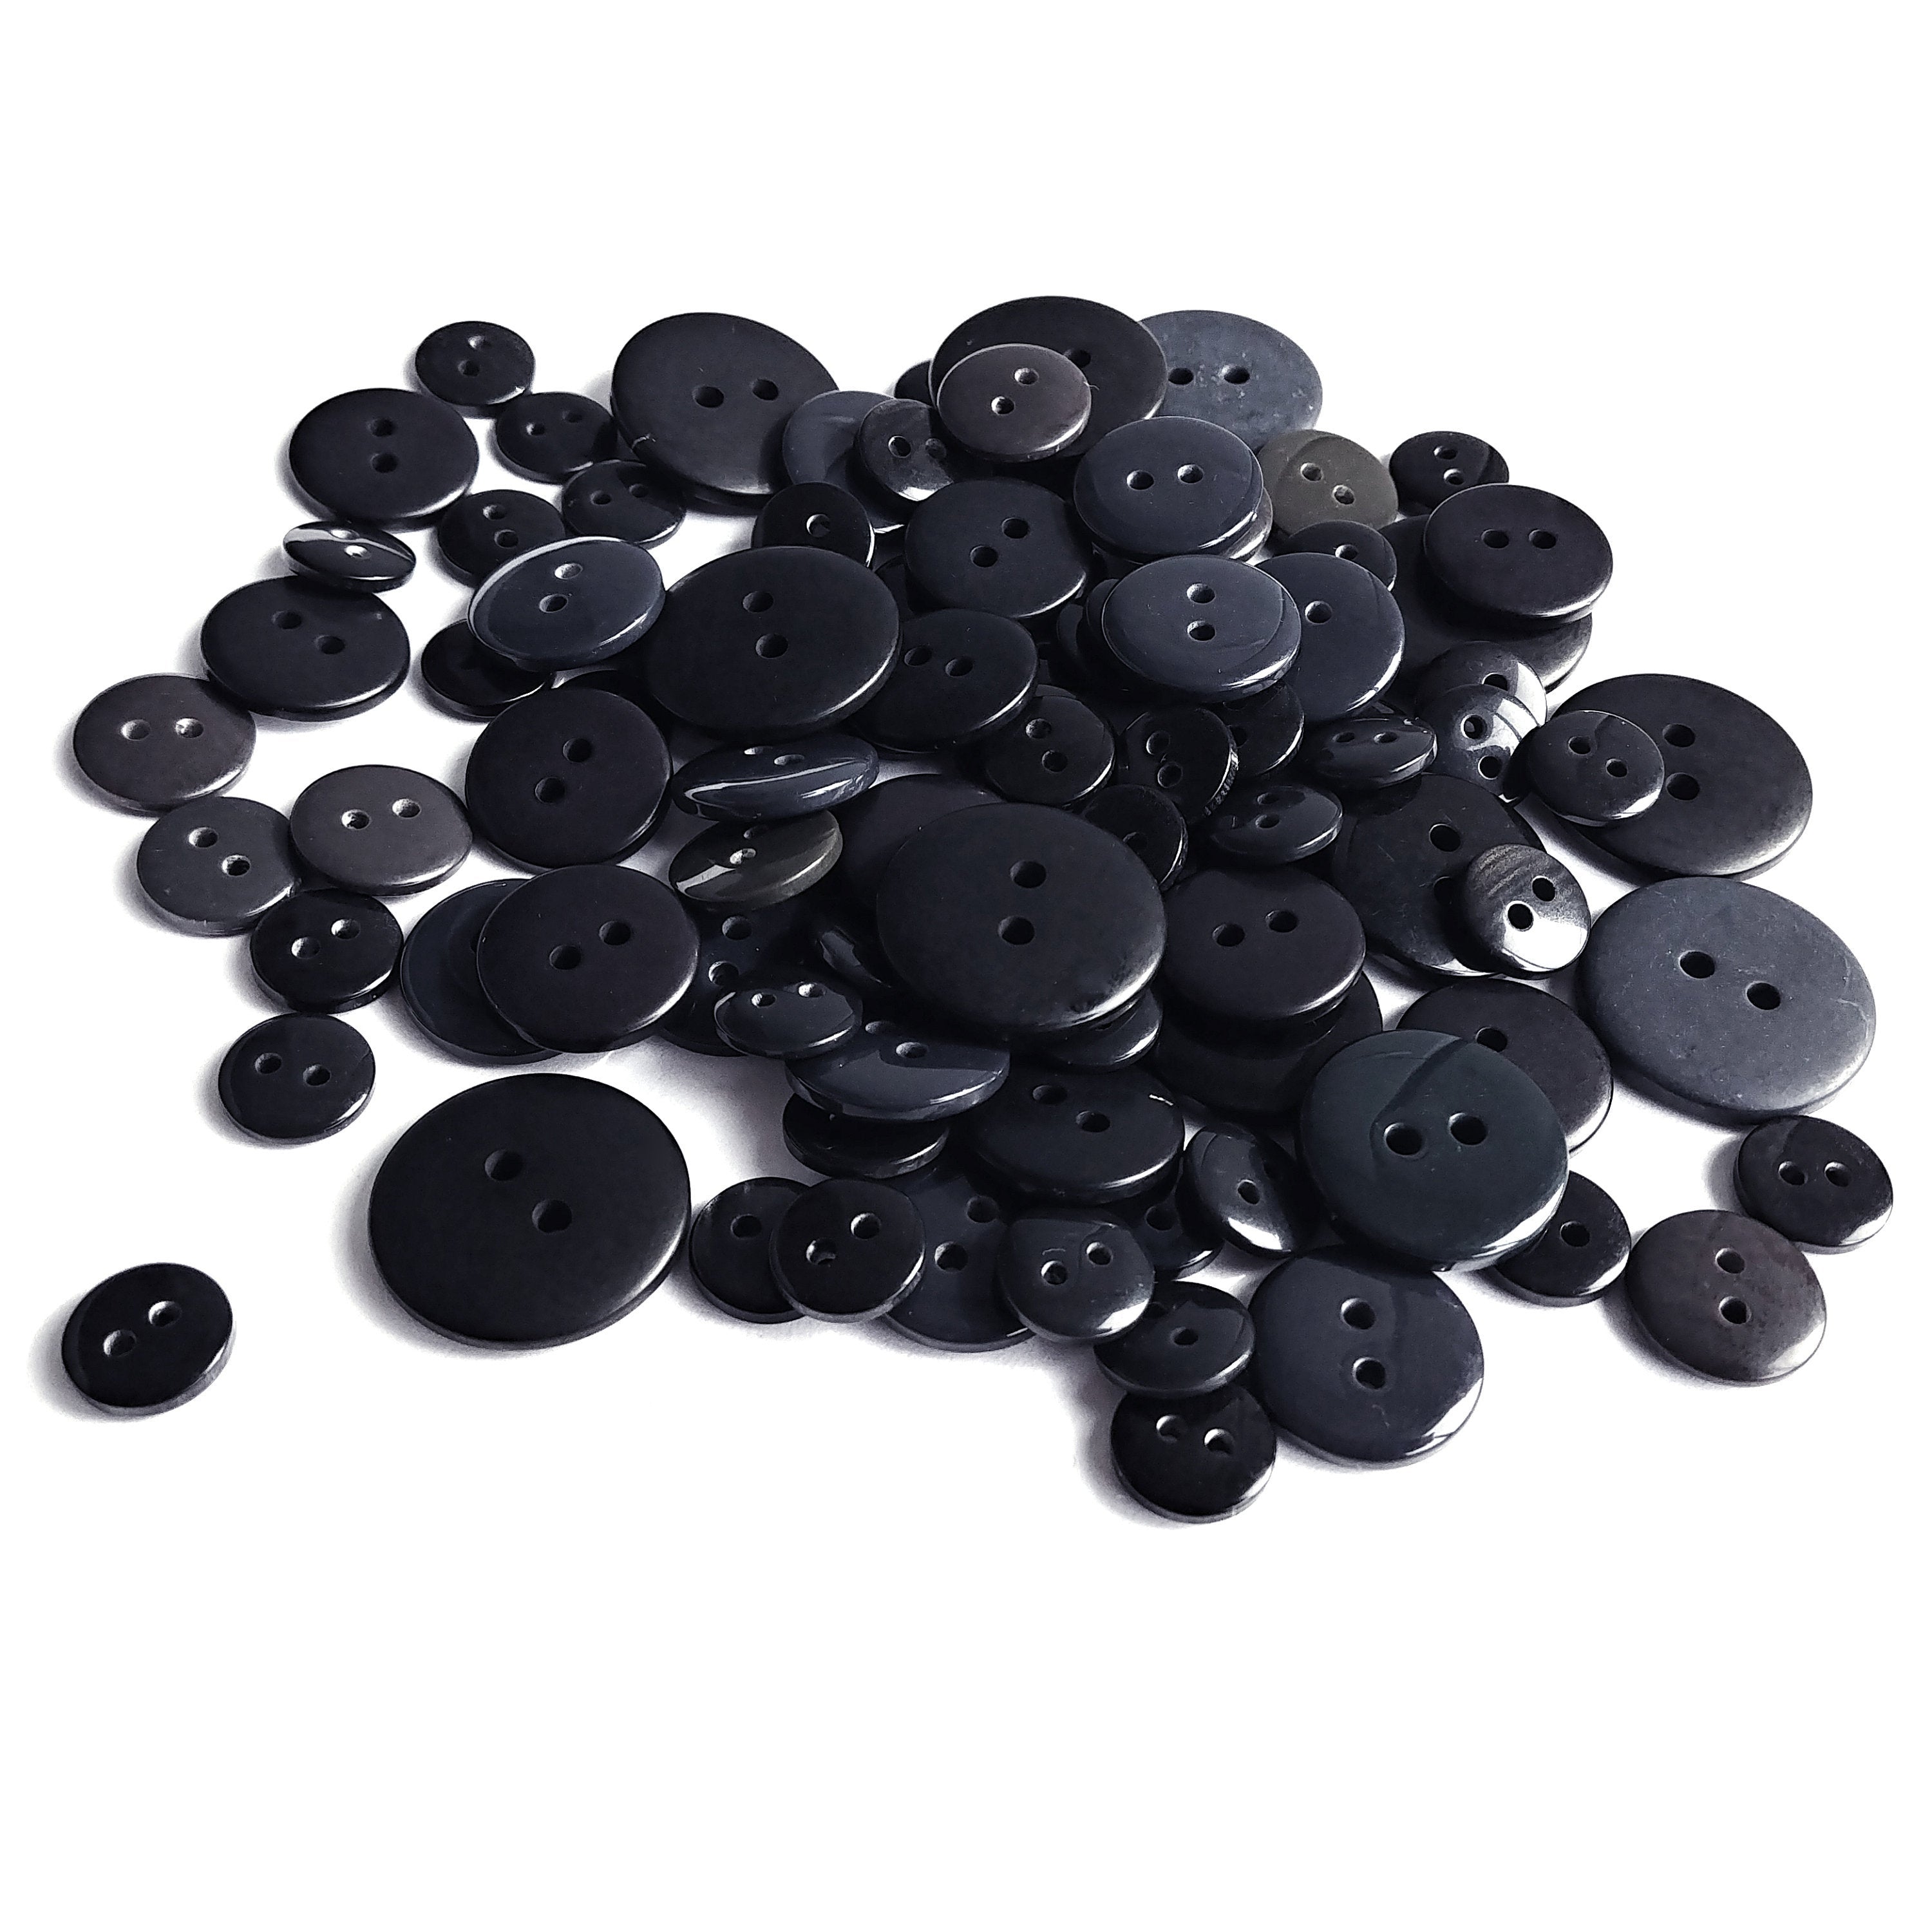 13mm Black Buttons, Black Buttons - 2 Hole - Round - 9/16in. (13mm) - 6  Pieces/Pkg. (nmsl189)